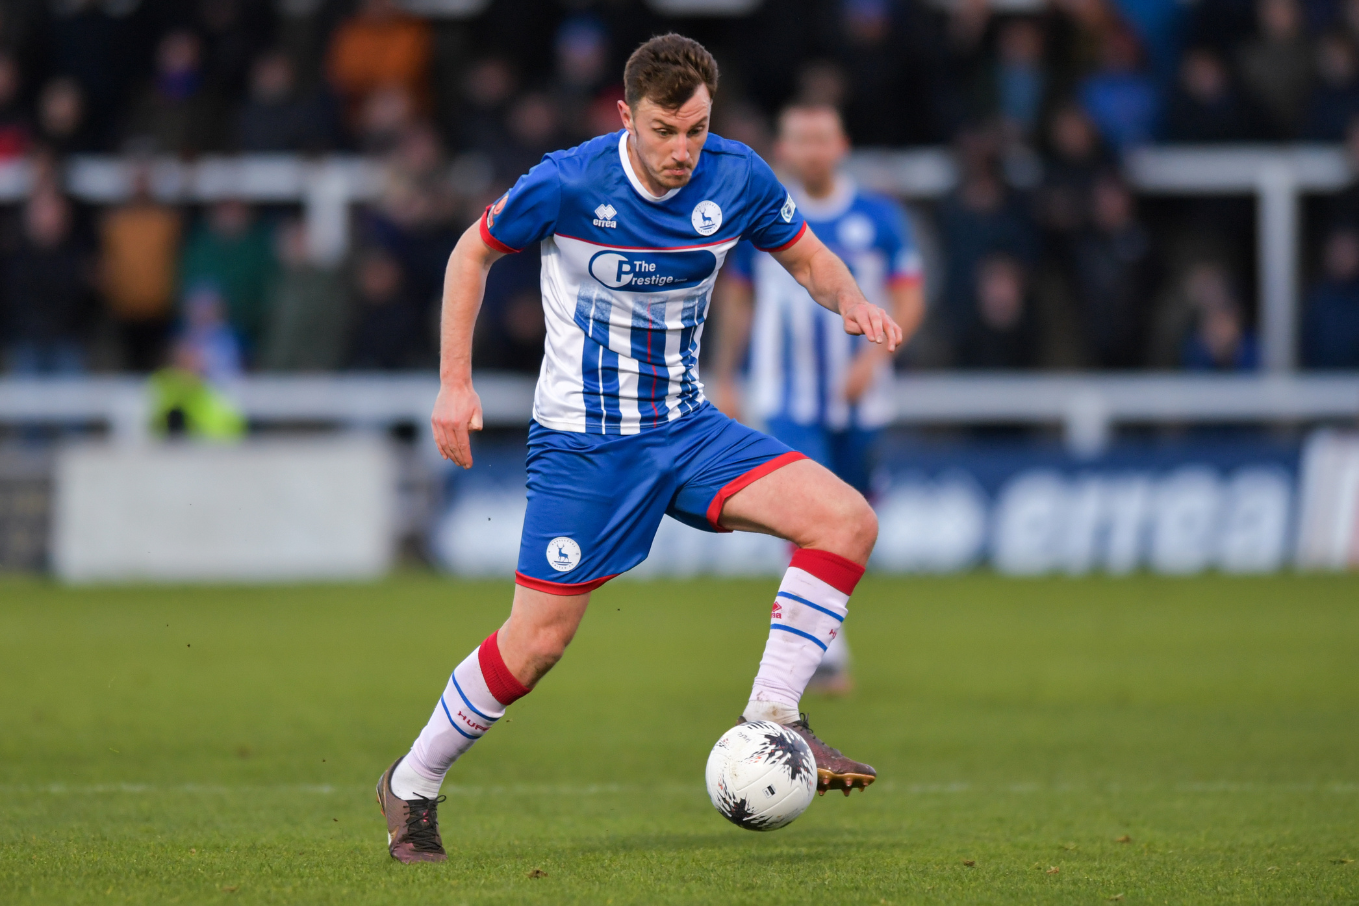 Match Preview: Pools on the Road to Chesterfield - News - Hartlepool United